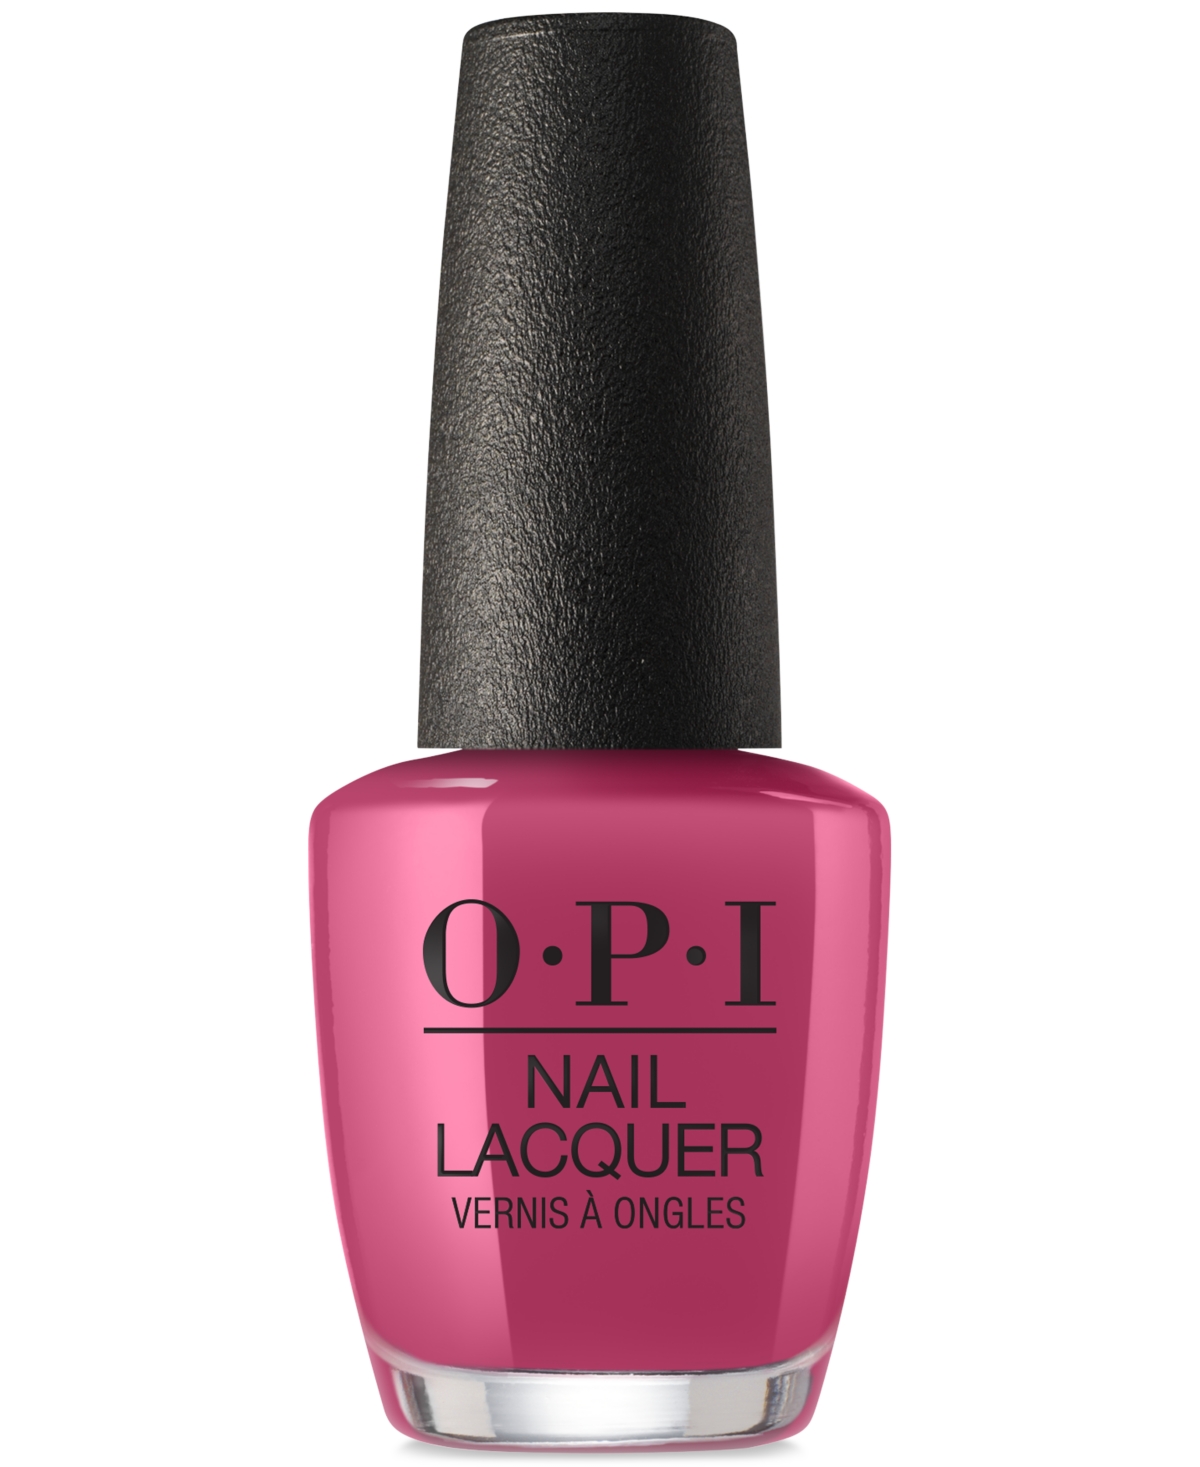 Opi Nail Lacquer In Aurora Berry-alis